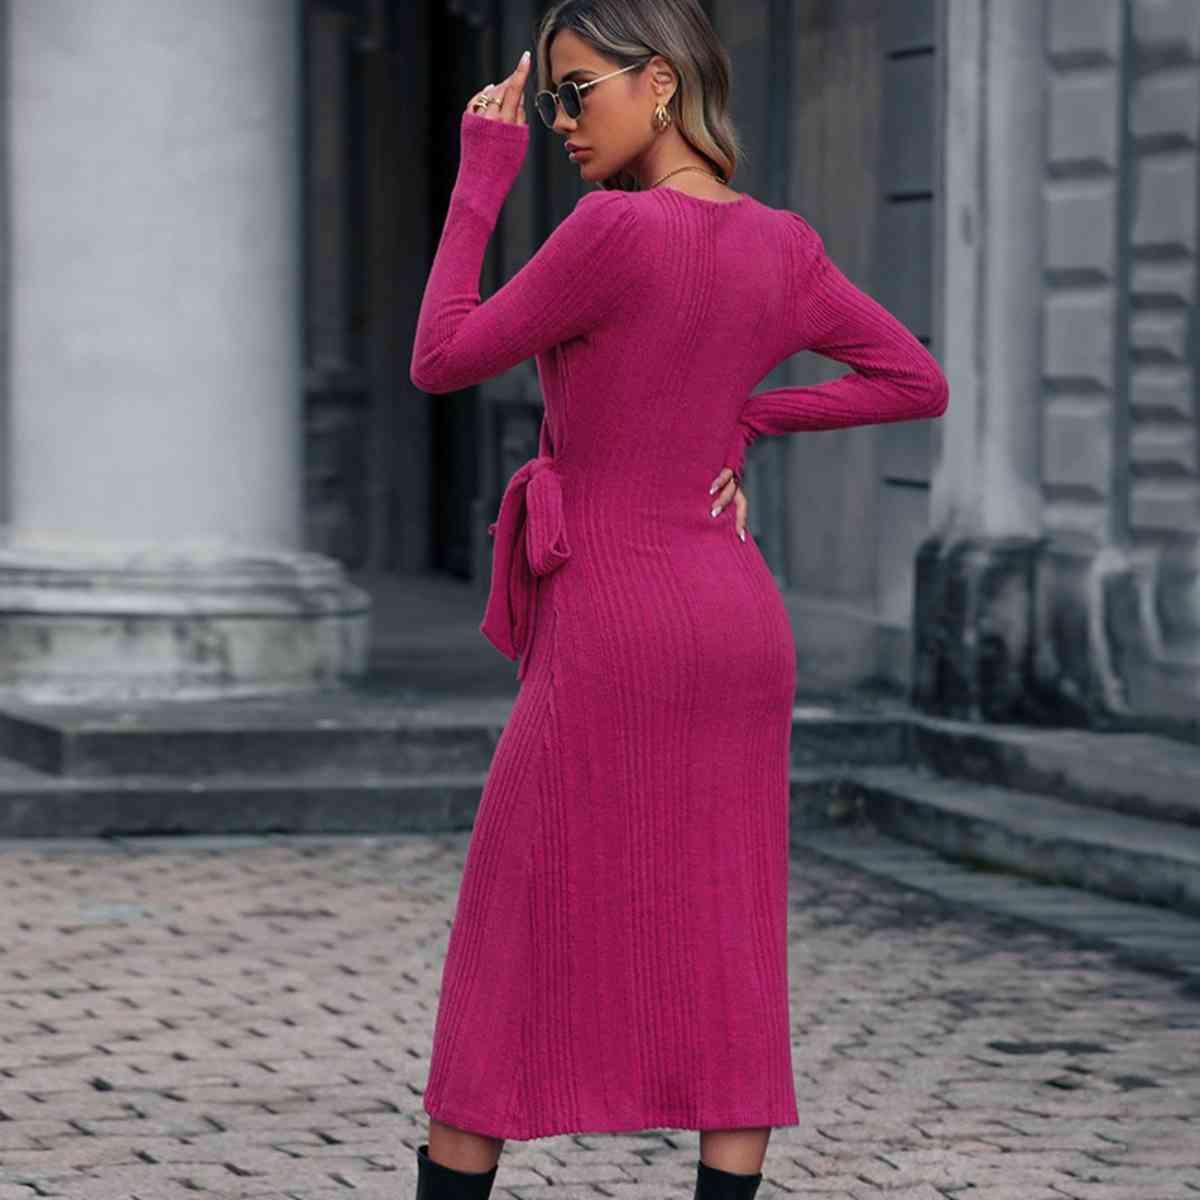 a woman in a pink dress and black boots